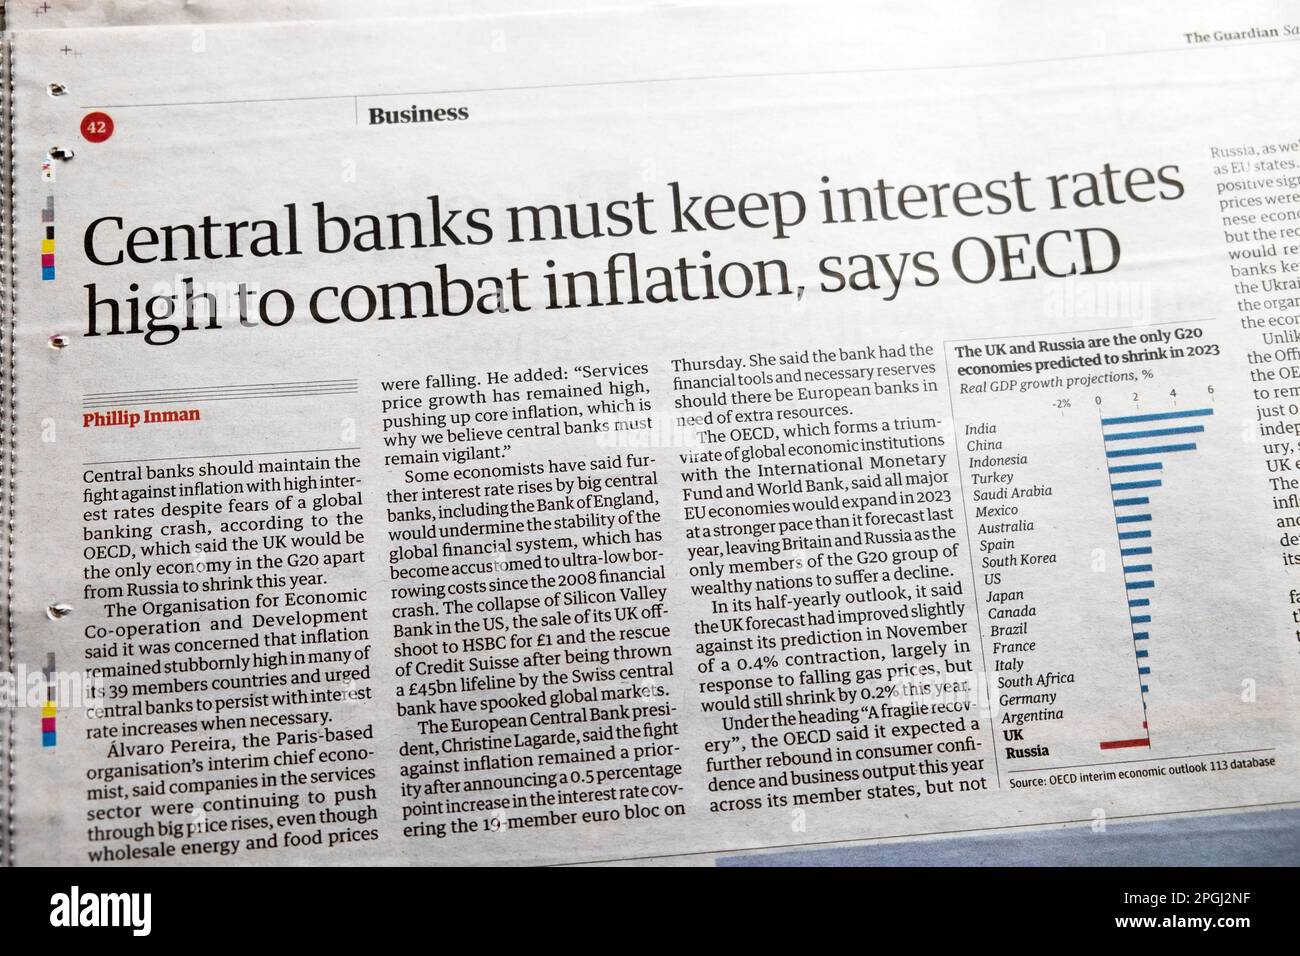 'Central banks must keep interest rates high to combat inflation says OECD' Guardian newspaper headline financial article 18th March 2023 London UK Stock Photo